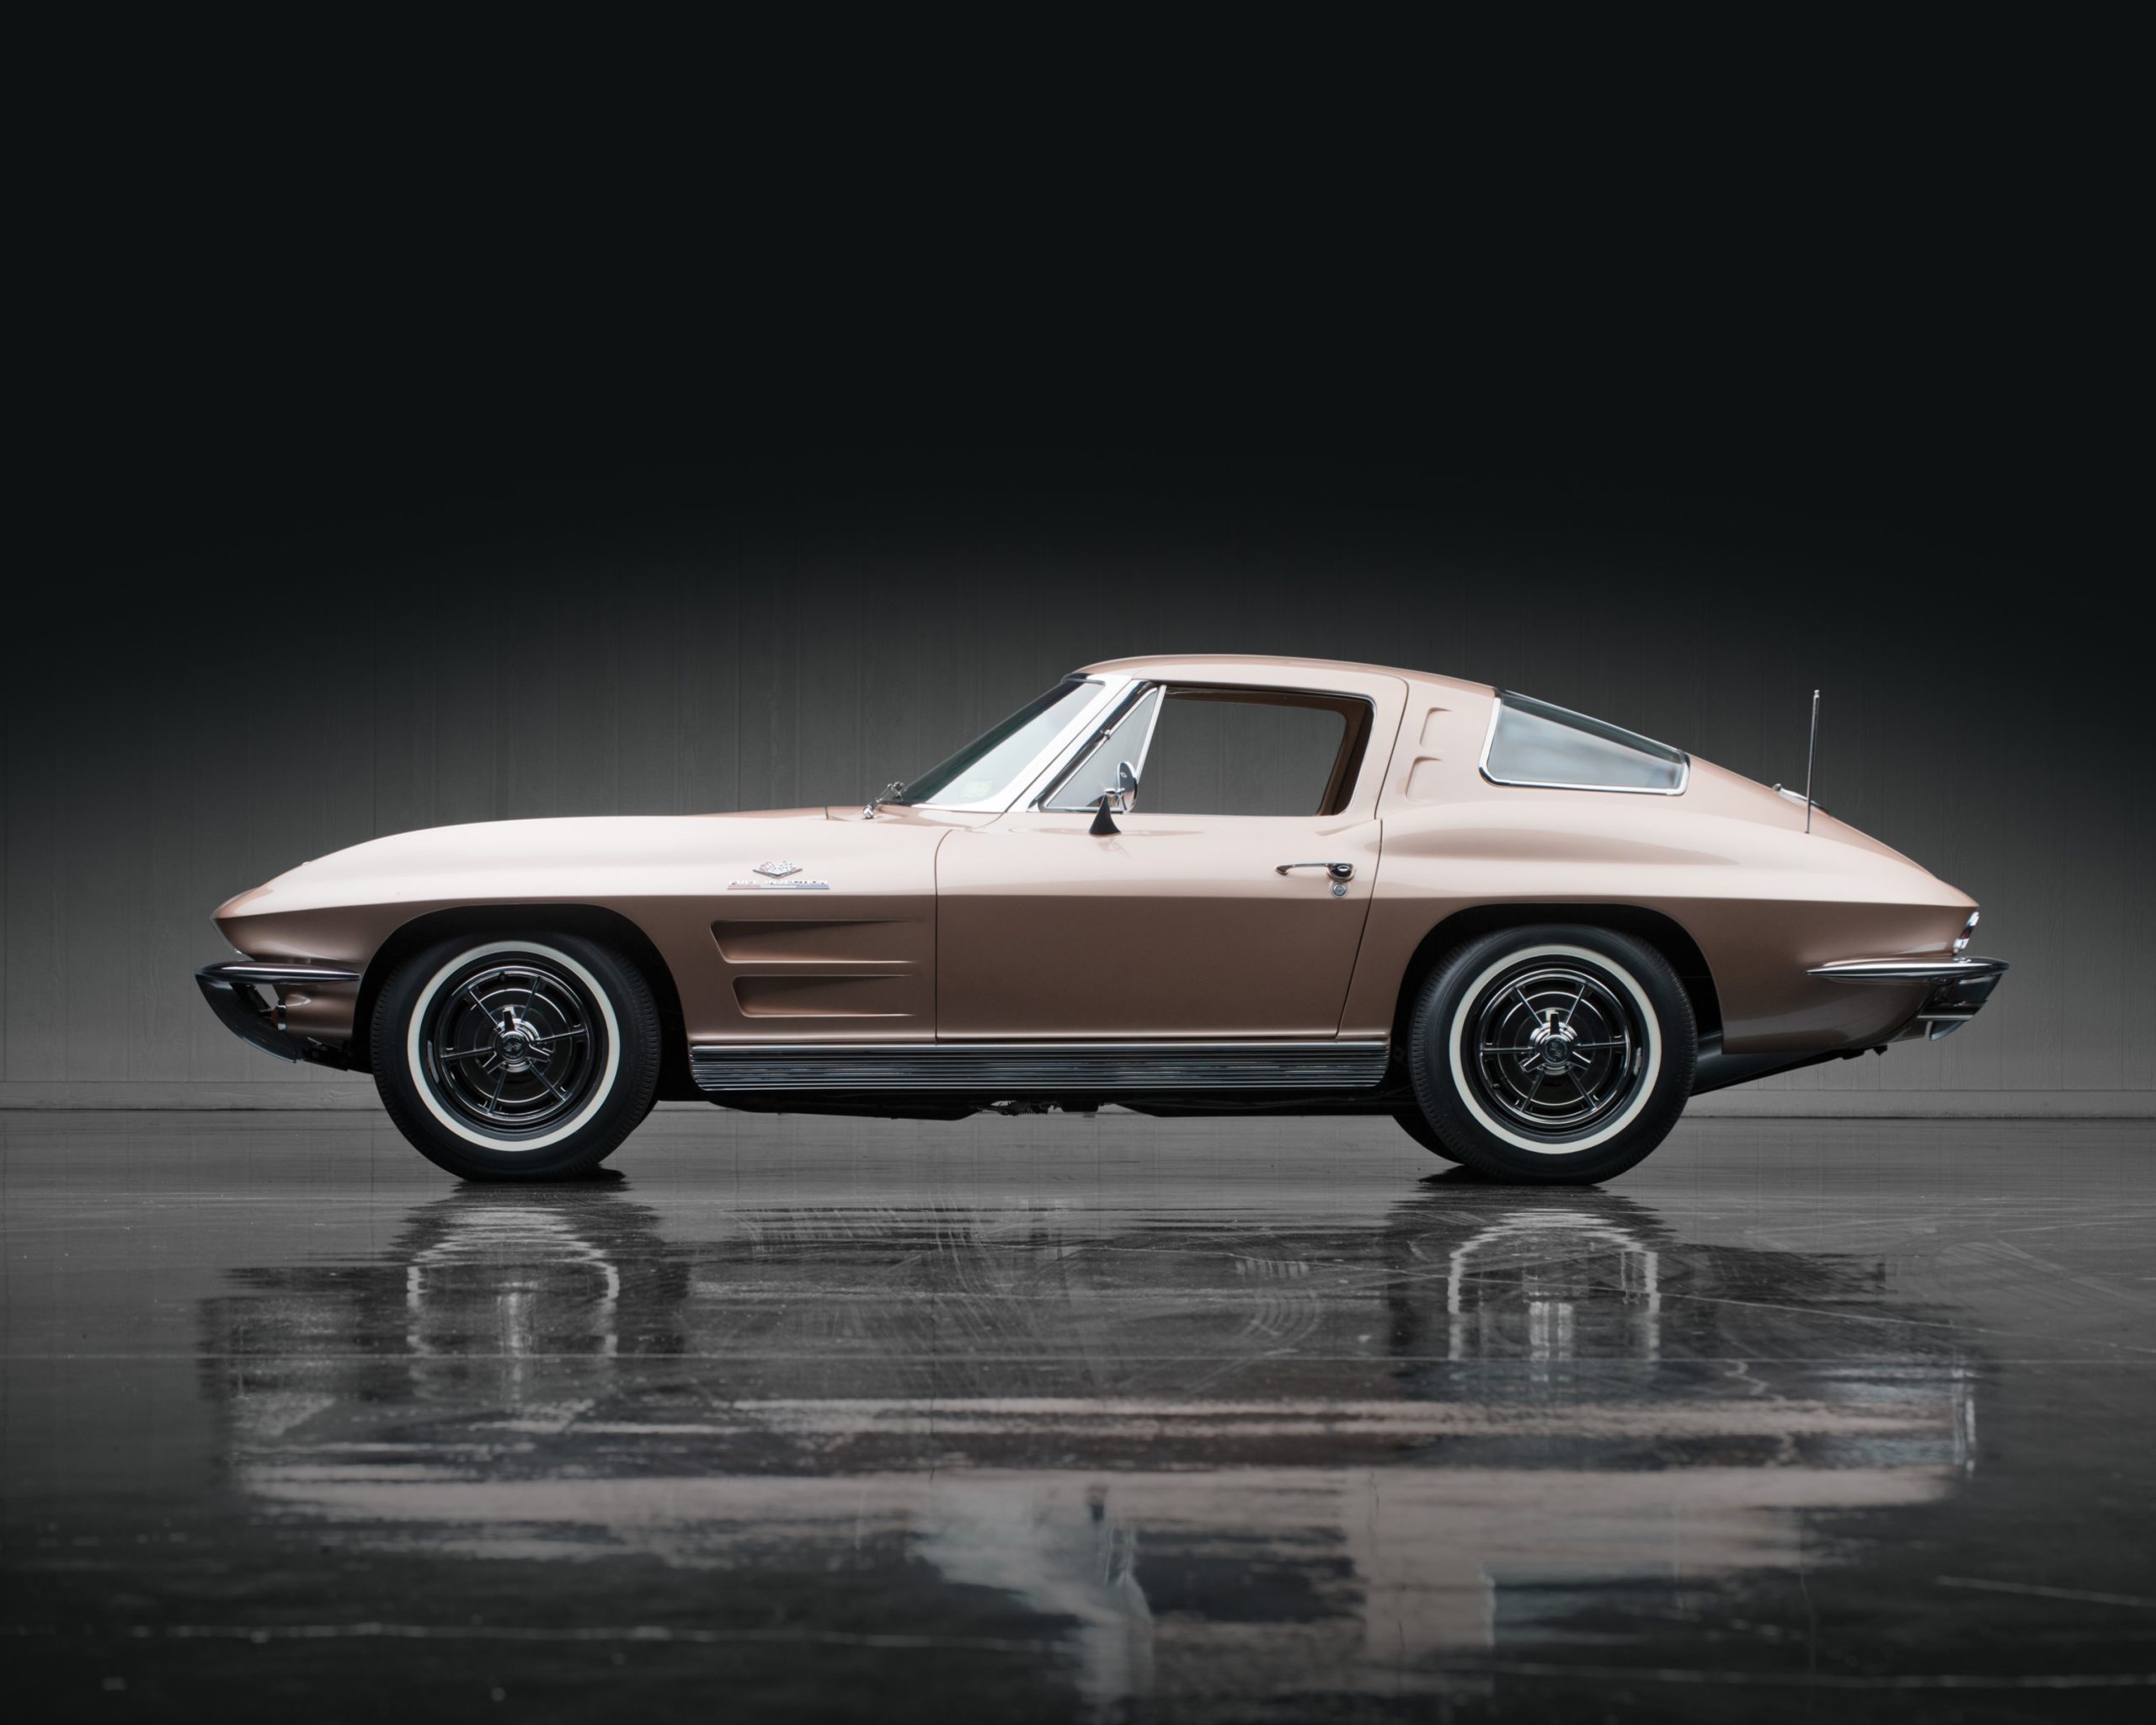 1963 Chevrolet Corvette Sting Ray 'Fuel-Injected' Split-Window Coupe Darin Schnabel | ©2013 Courtesy of RM Auctions